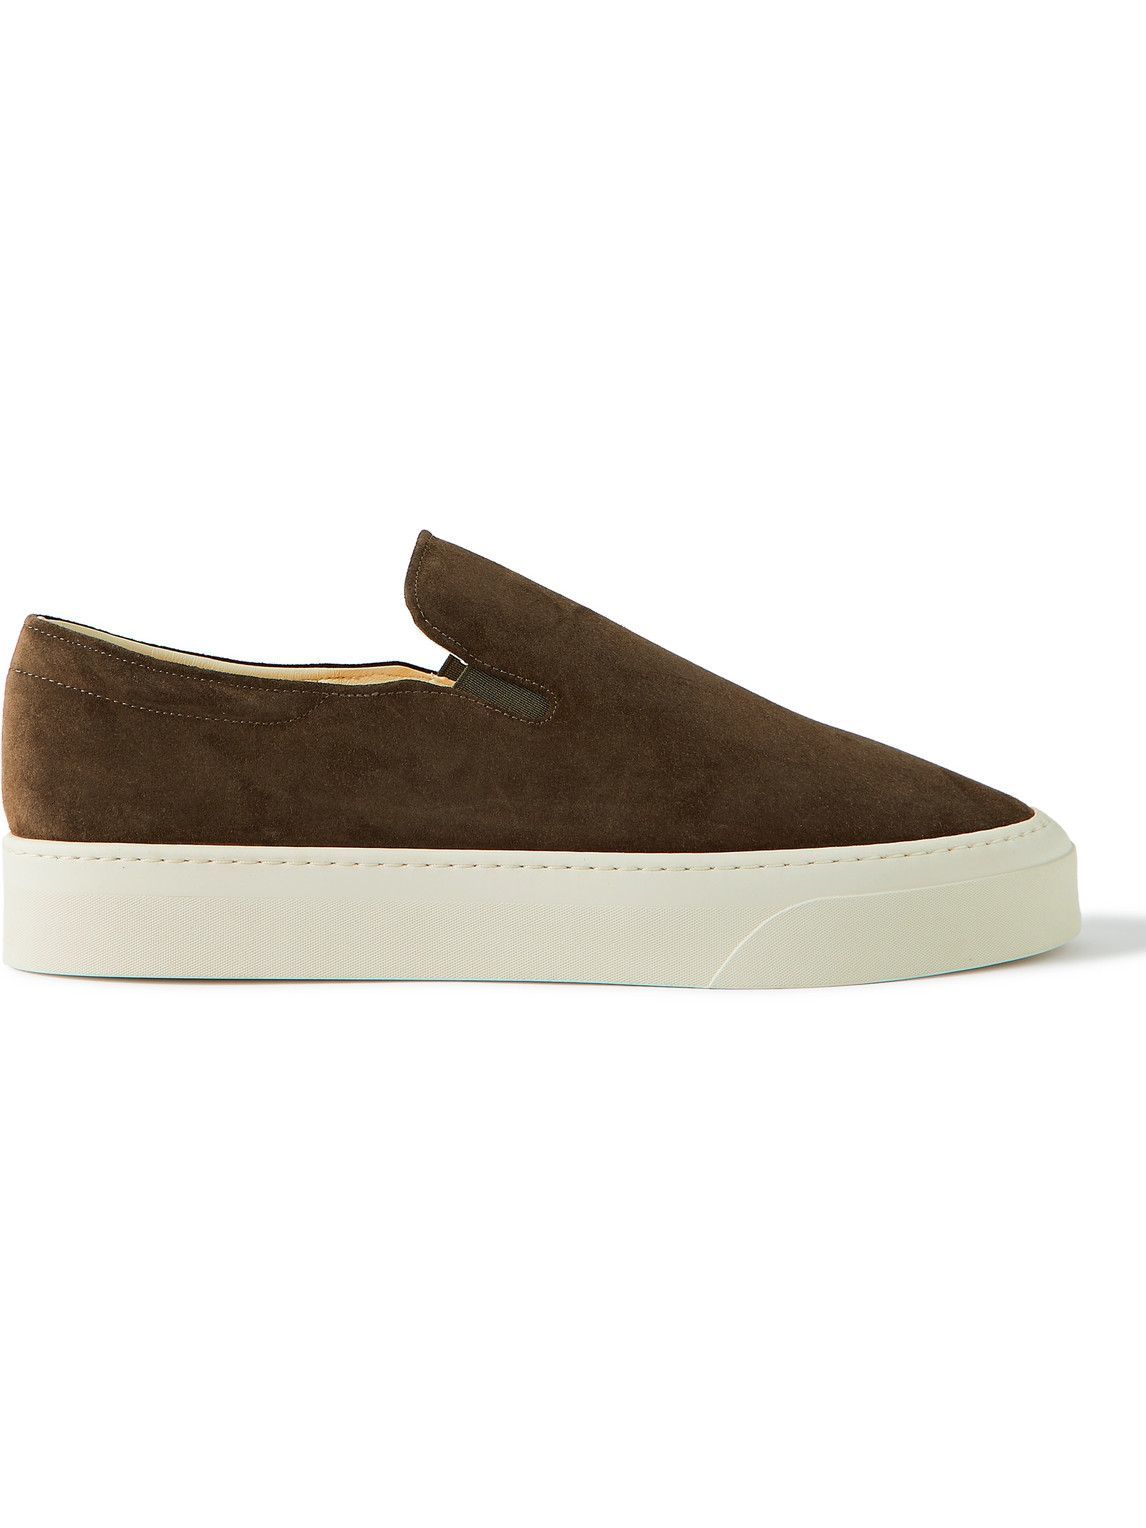 The Row - Dean Suede Slip-On Sneakers - Green The Row